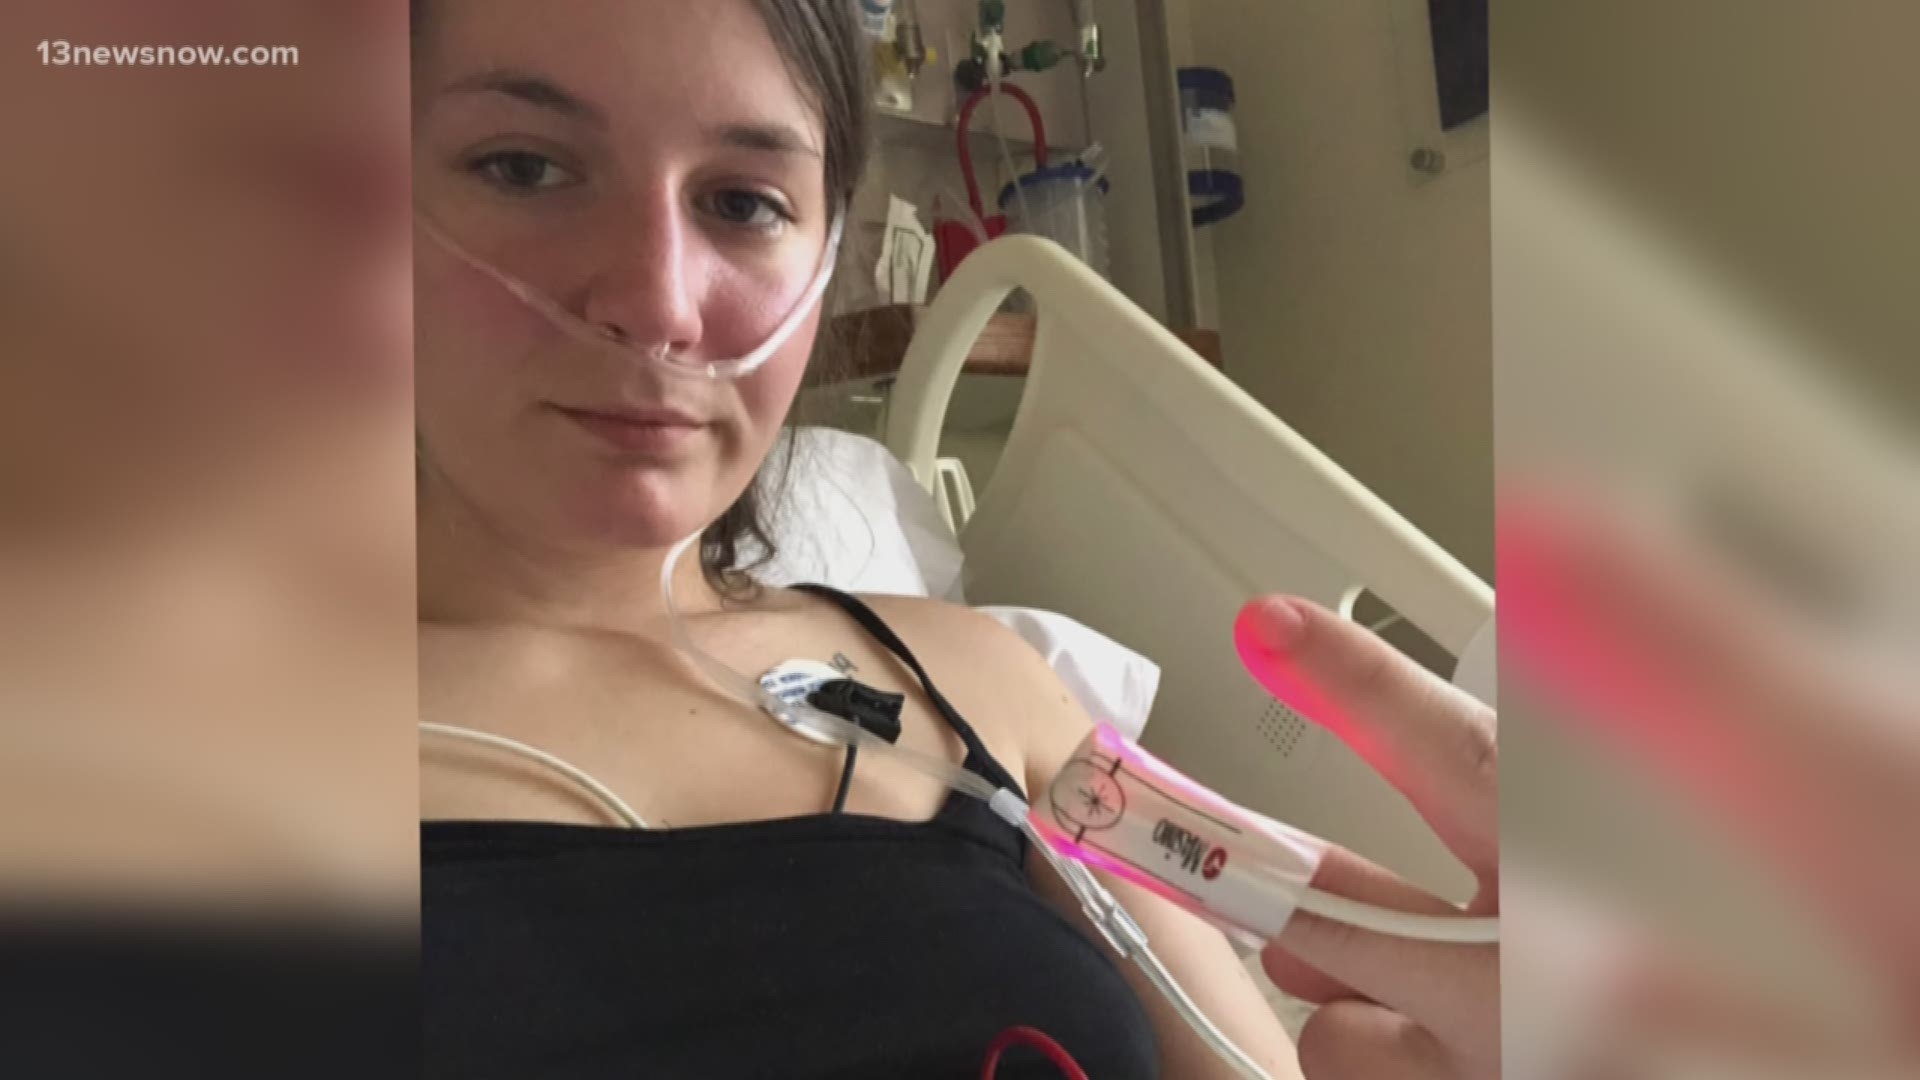 She started vaping three years ago to avoid smoking cigarettes. Doctors said a chemical found in THC led to her lung injury. She was in the ICU for five days.